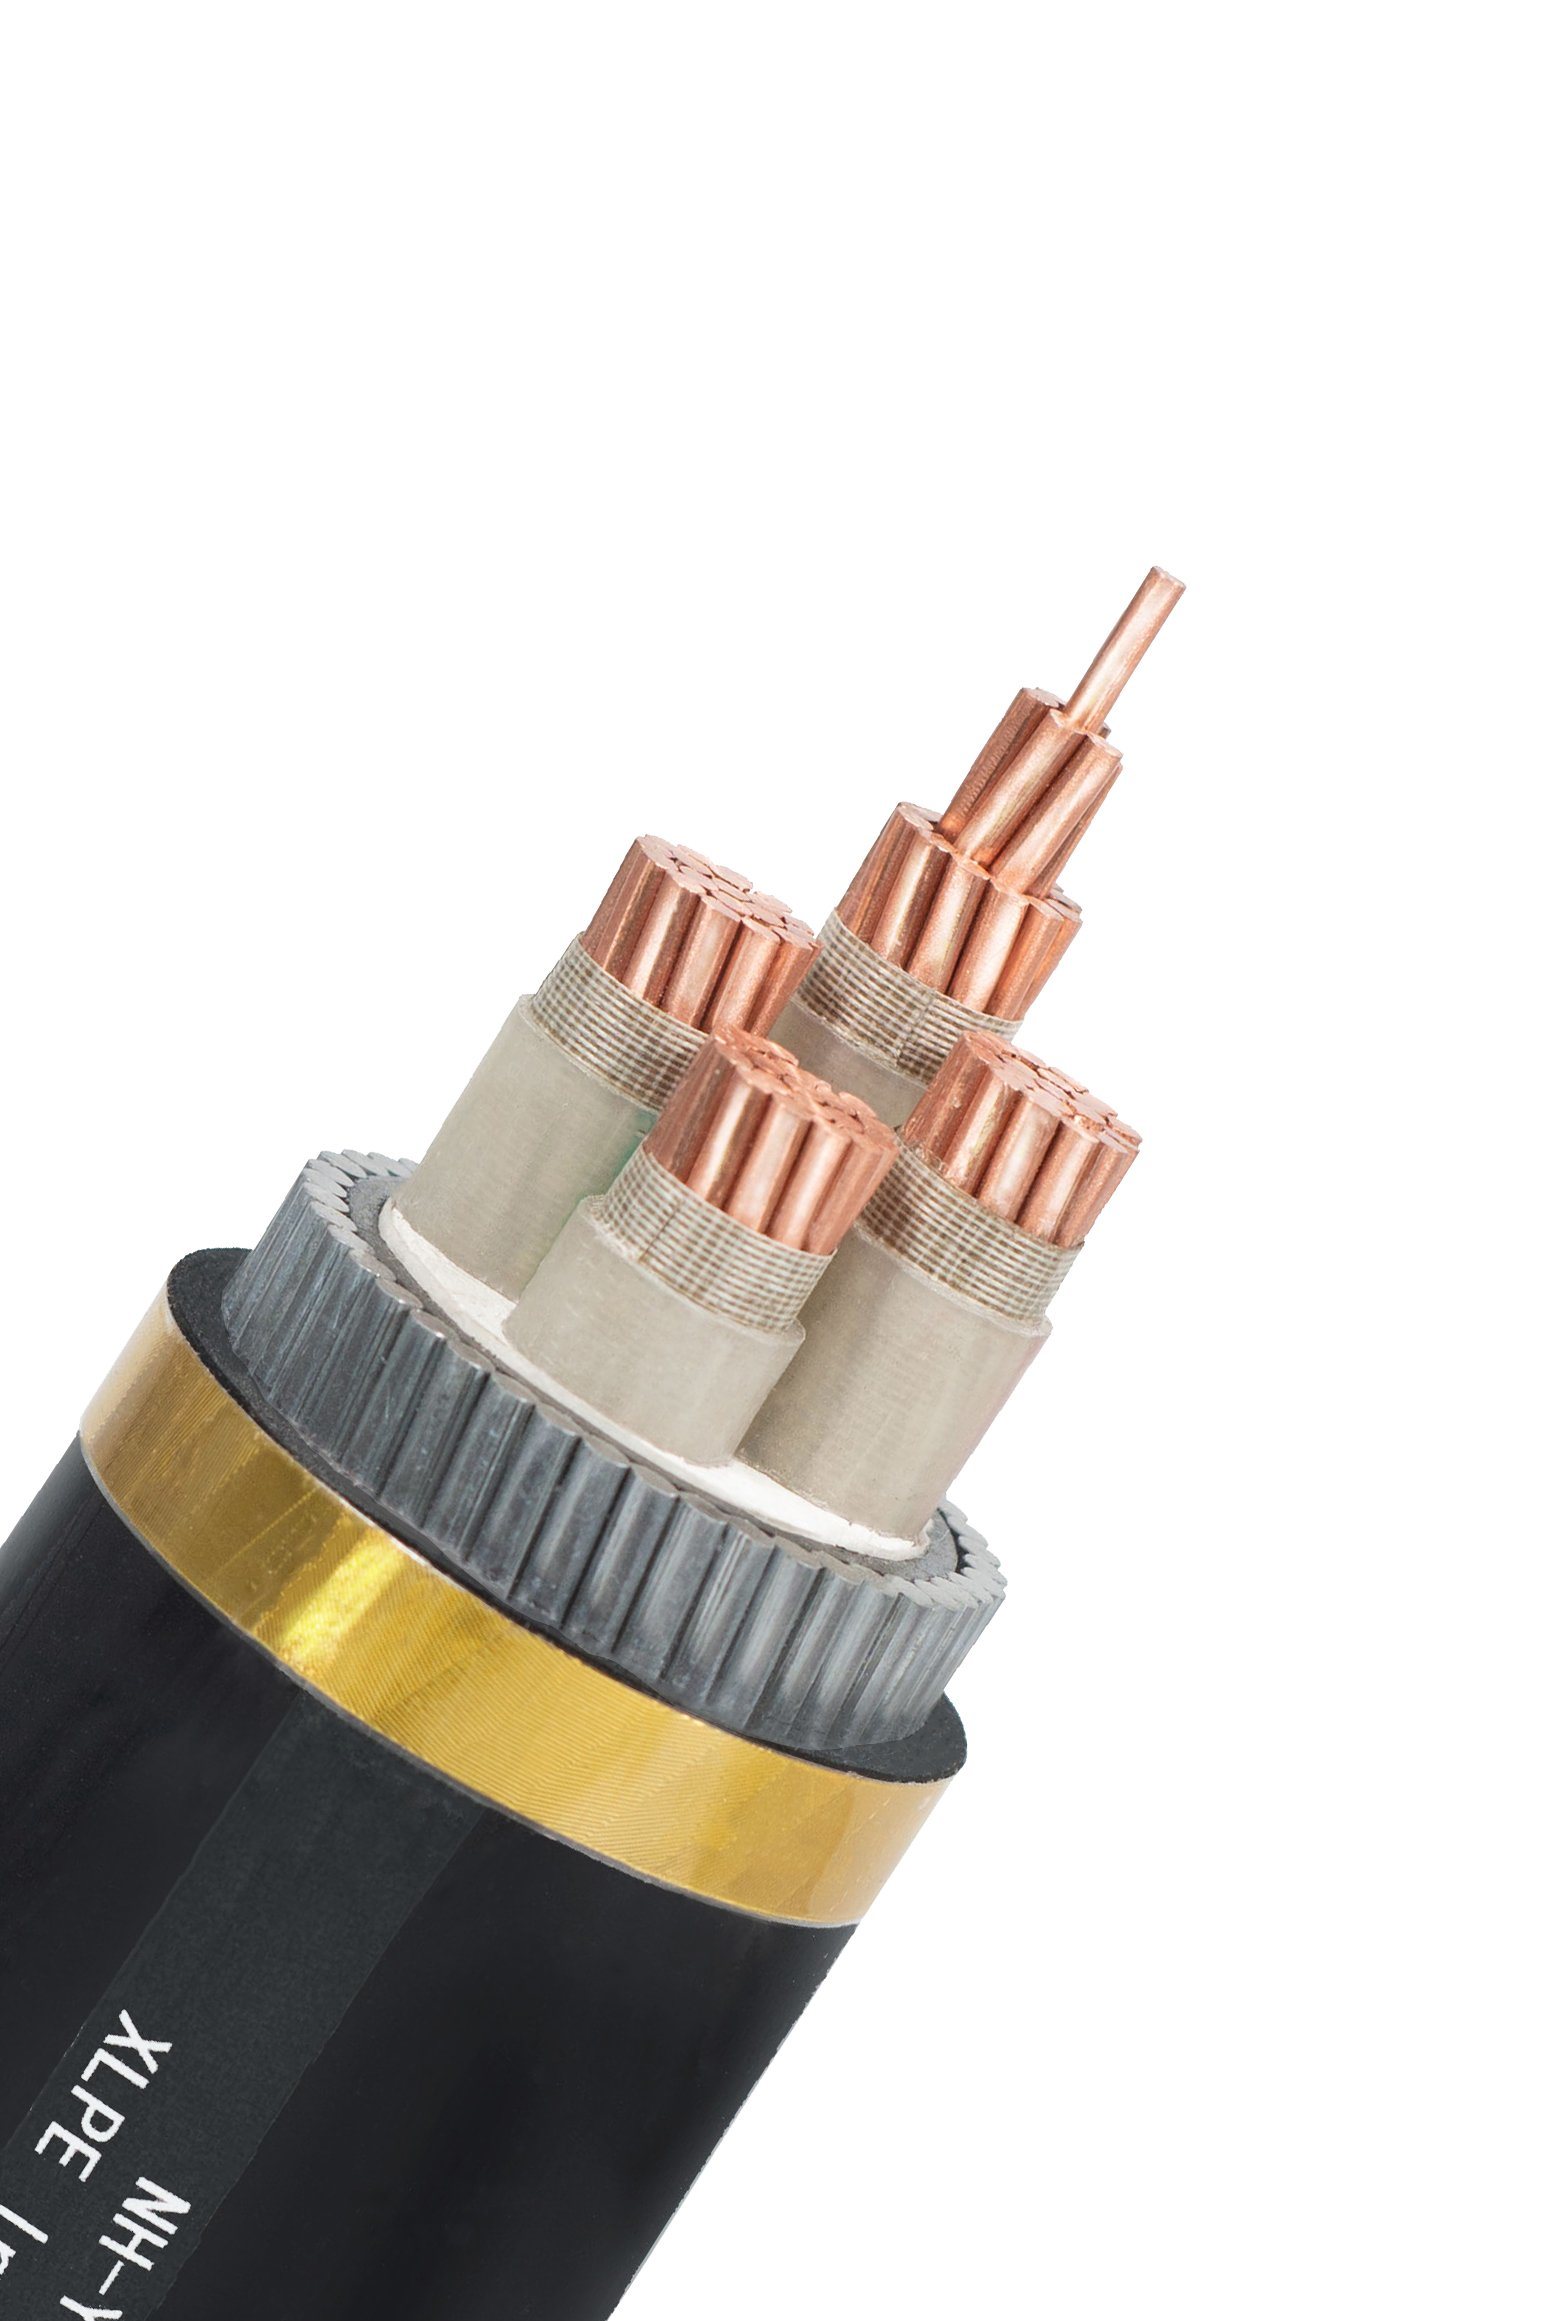 600/1000V Copper Conductor Underground XLPE Cable Steel Wire/Tape Armoured Power Cable BS 5467